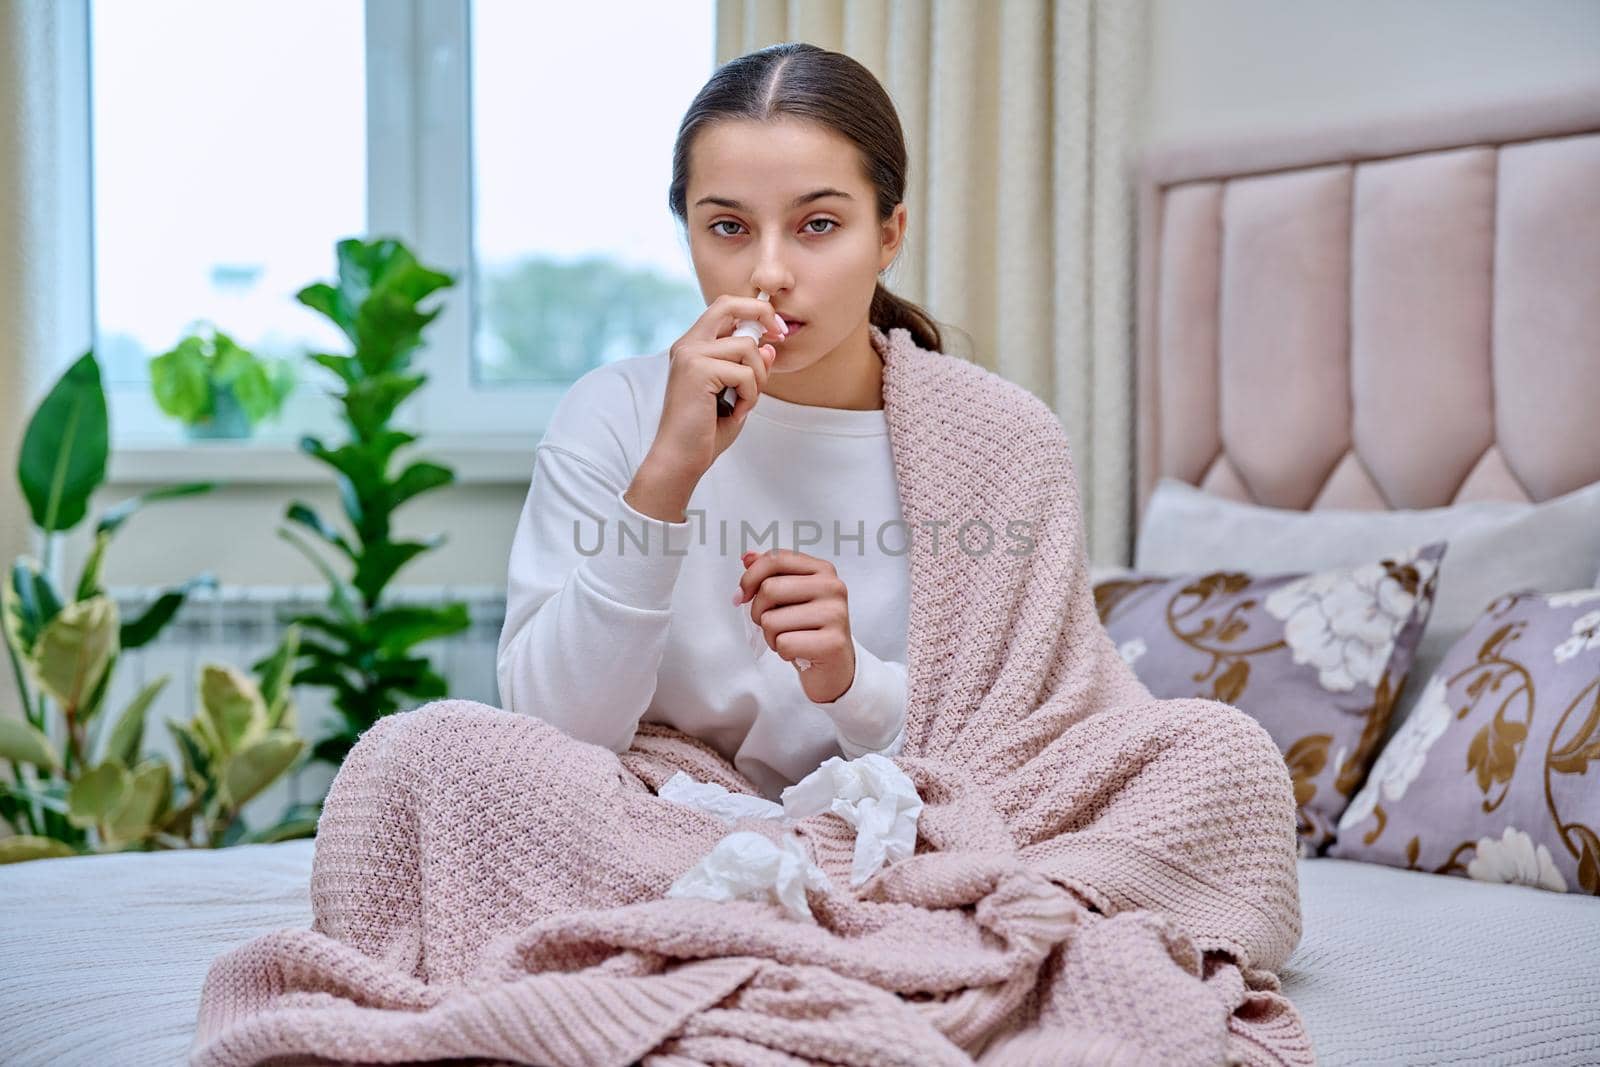 Young teenage female sitting in bed with runny nose medicine spray drops, sneezing into tissues, burying her nose. Autumn winter, rhinitis runny nose stuffy nose, treatment, flu season